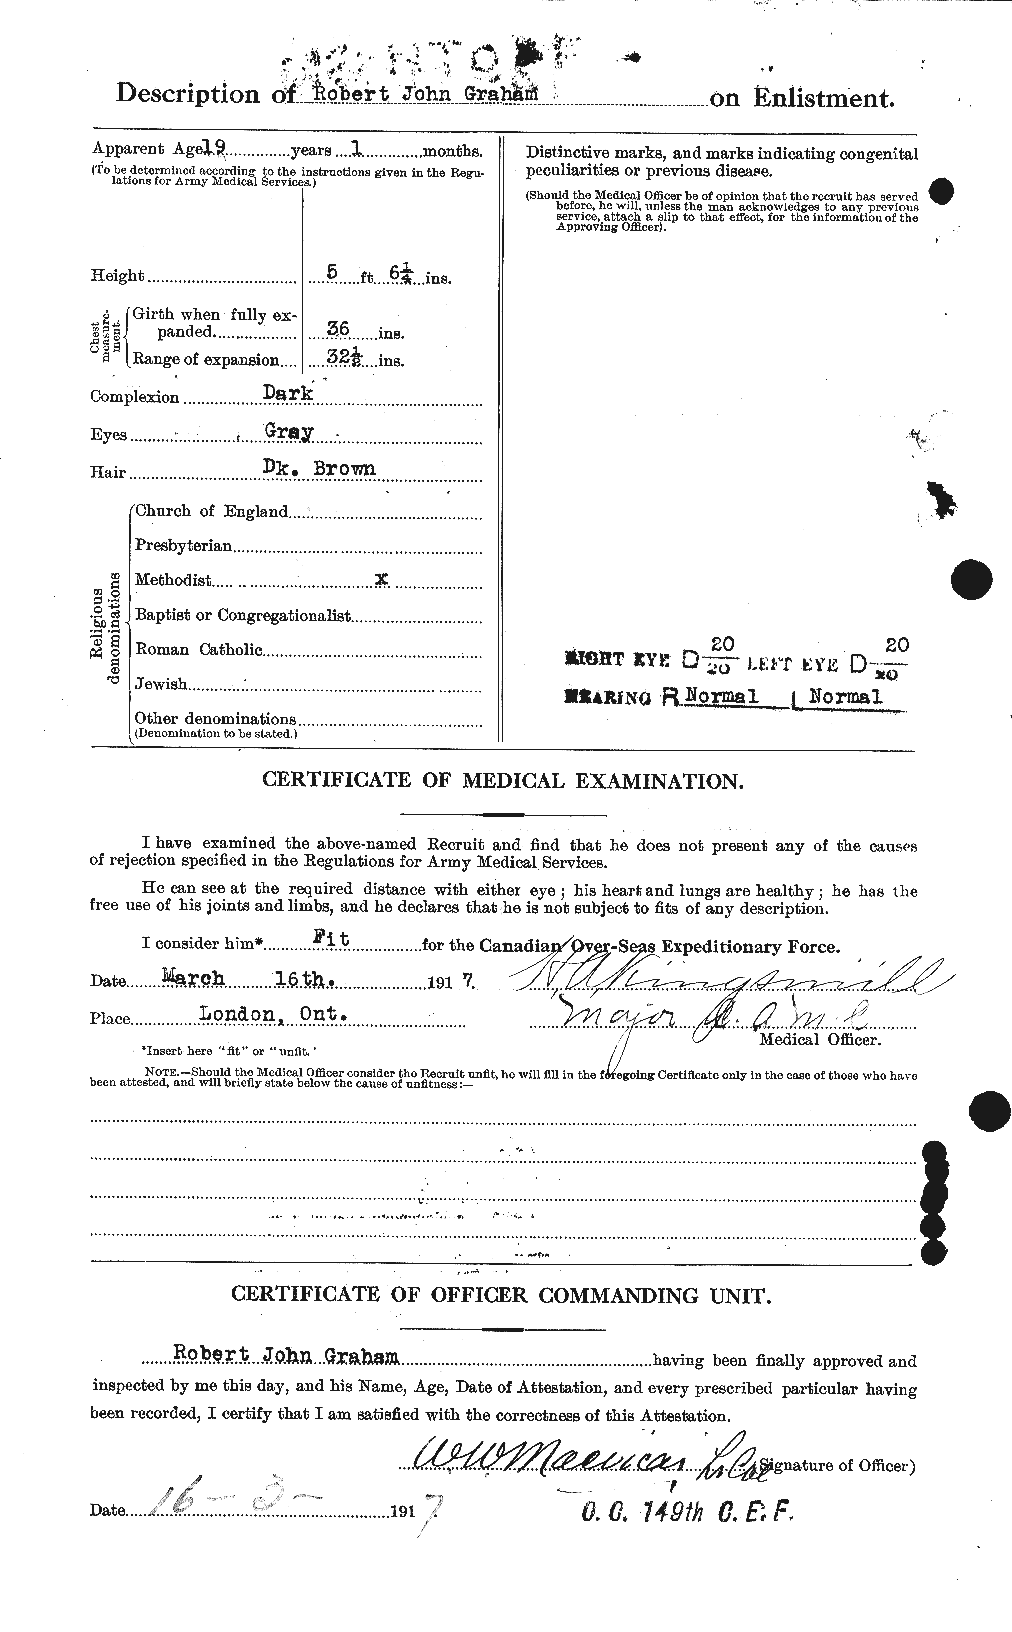 Personnel Records of the First World War - CEF 359412b